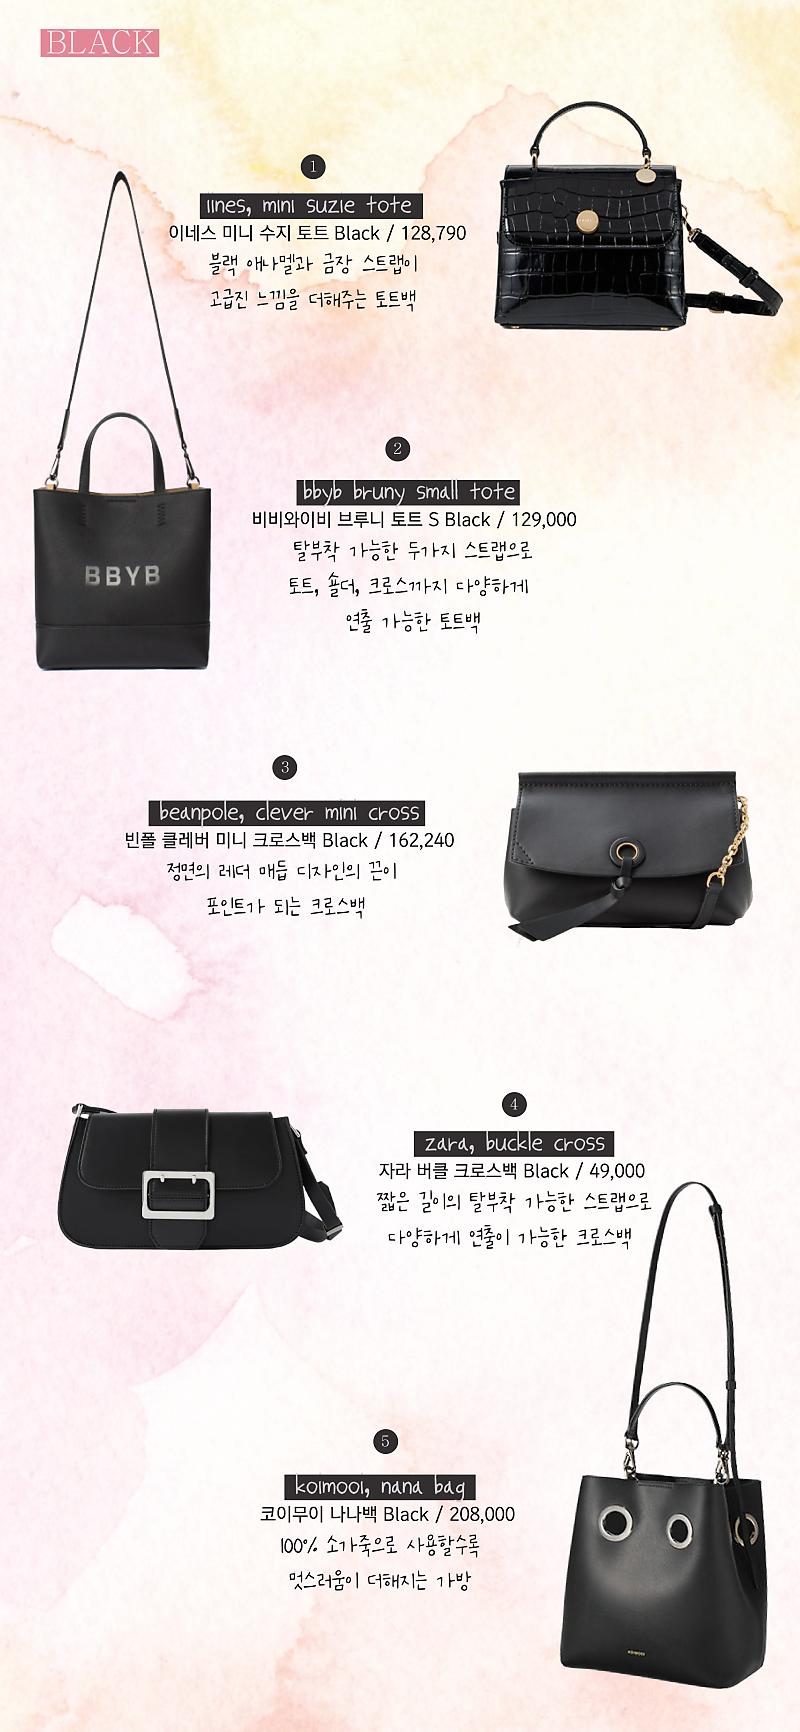 BBYB Bruni Small Tote Bag Jade Black by W Concept